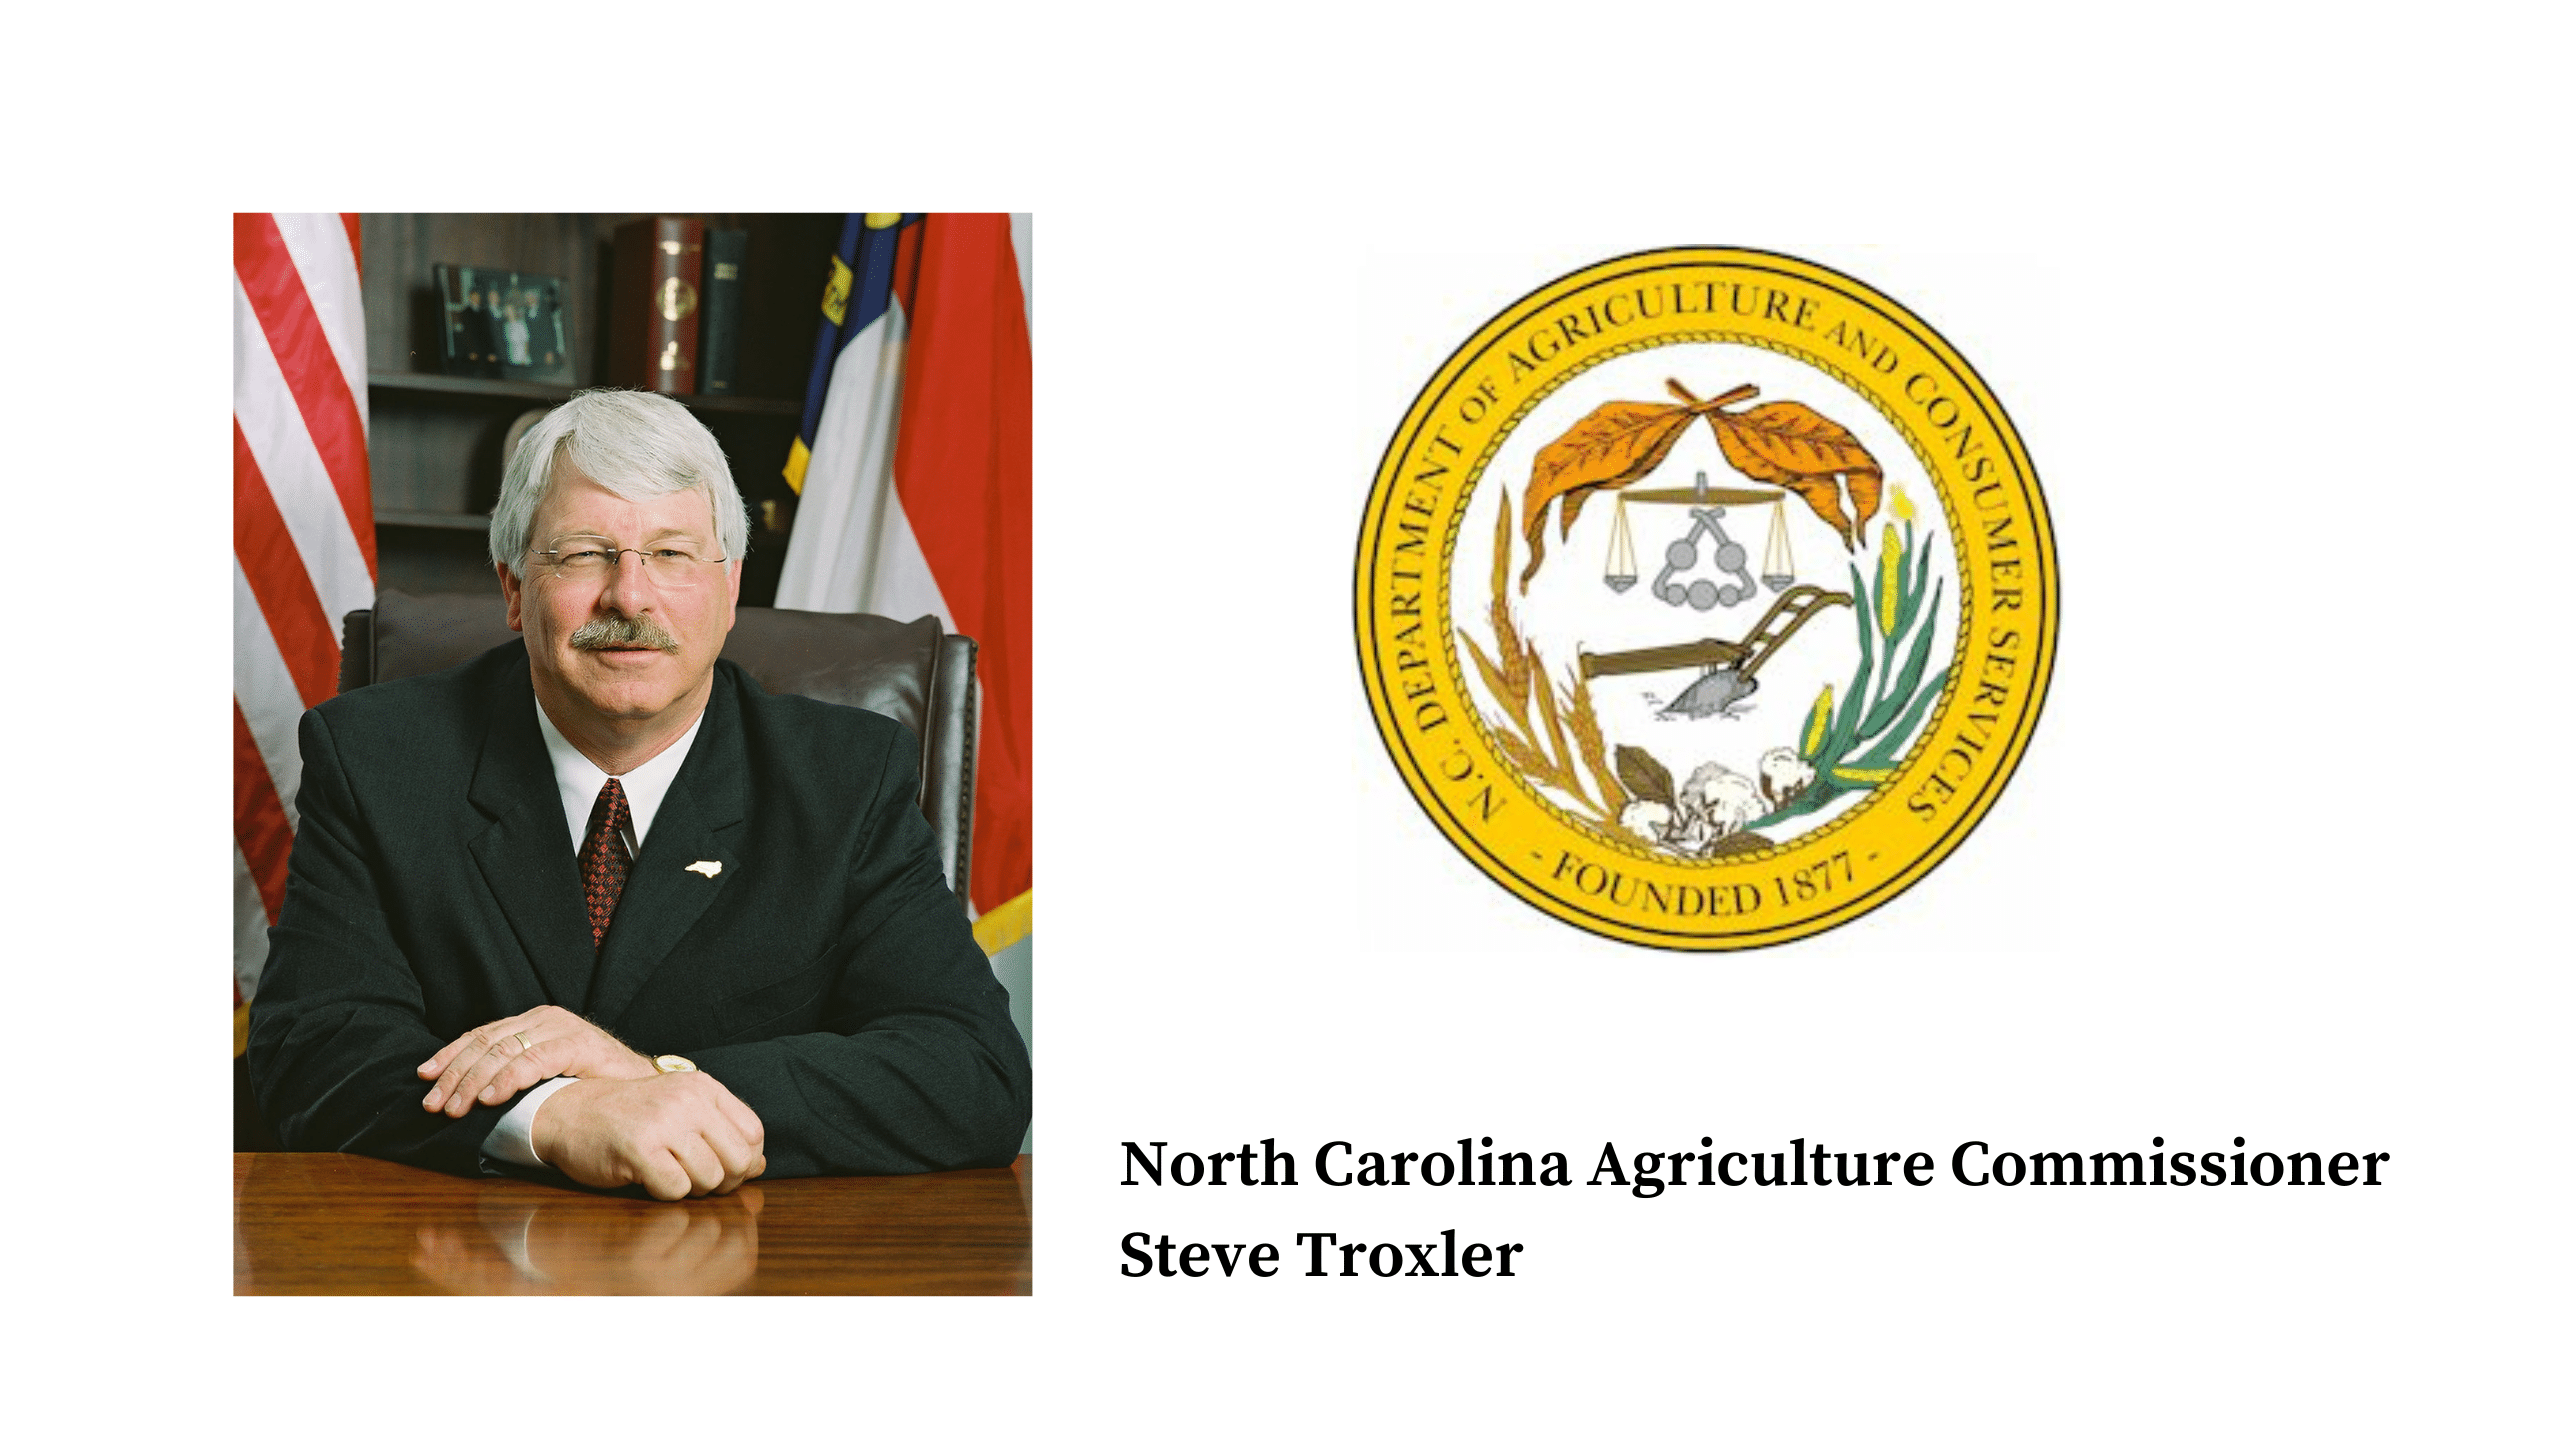 Critical Conversations with Scott T. Hamilton featuring North Carolina Agriculture Commissioners Steve Troxler